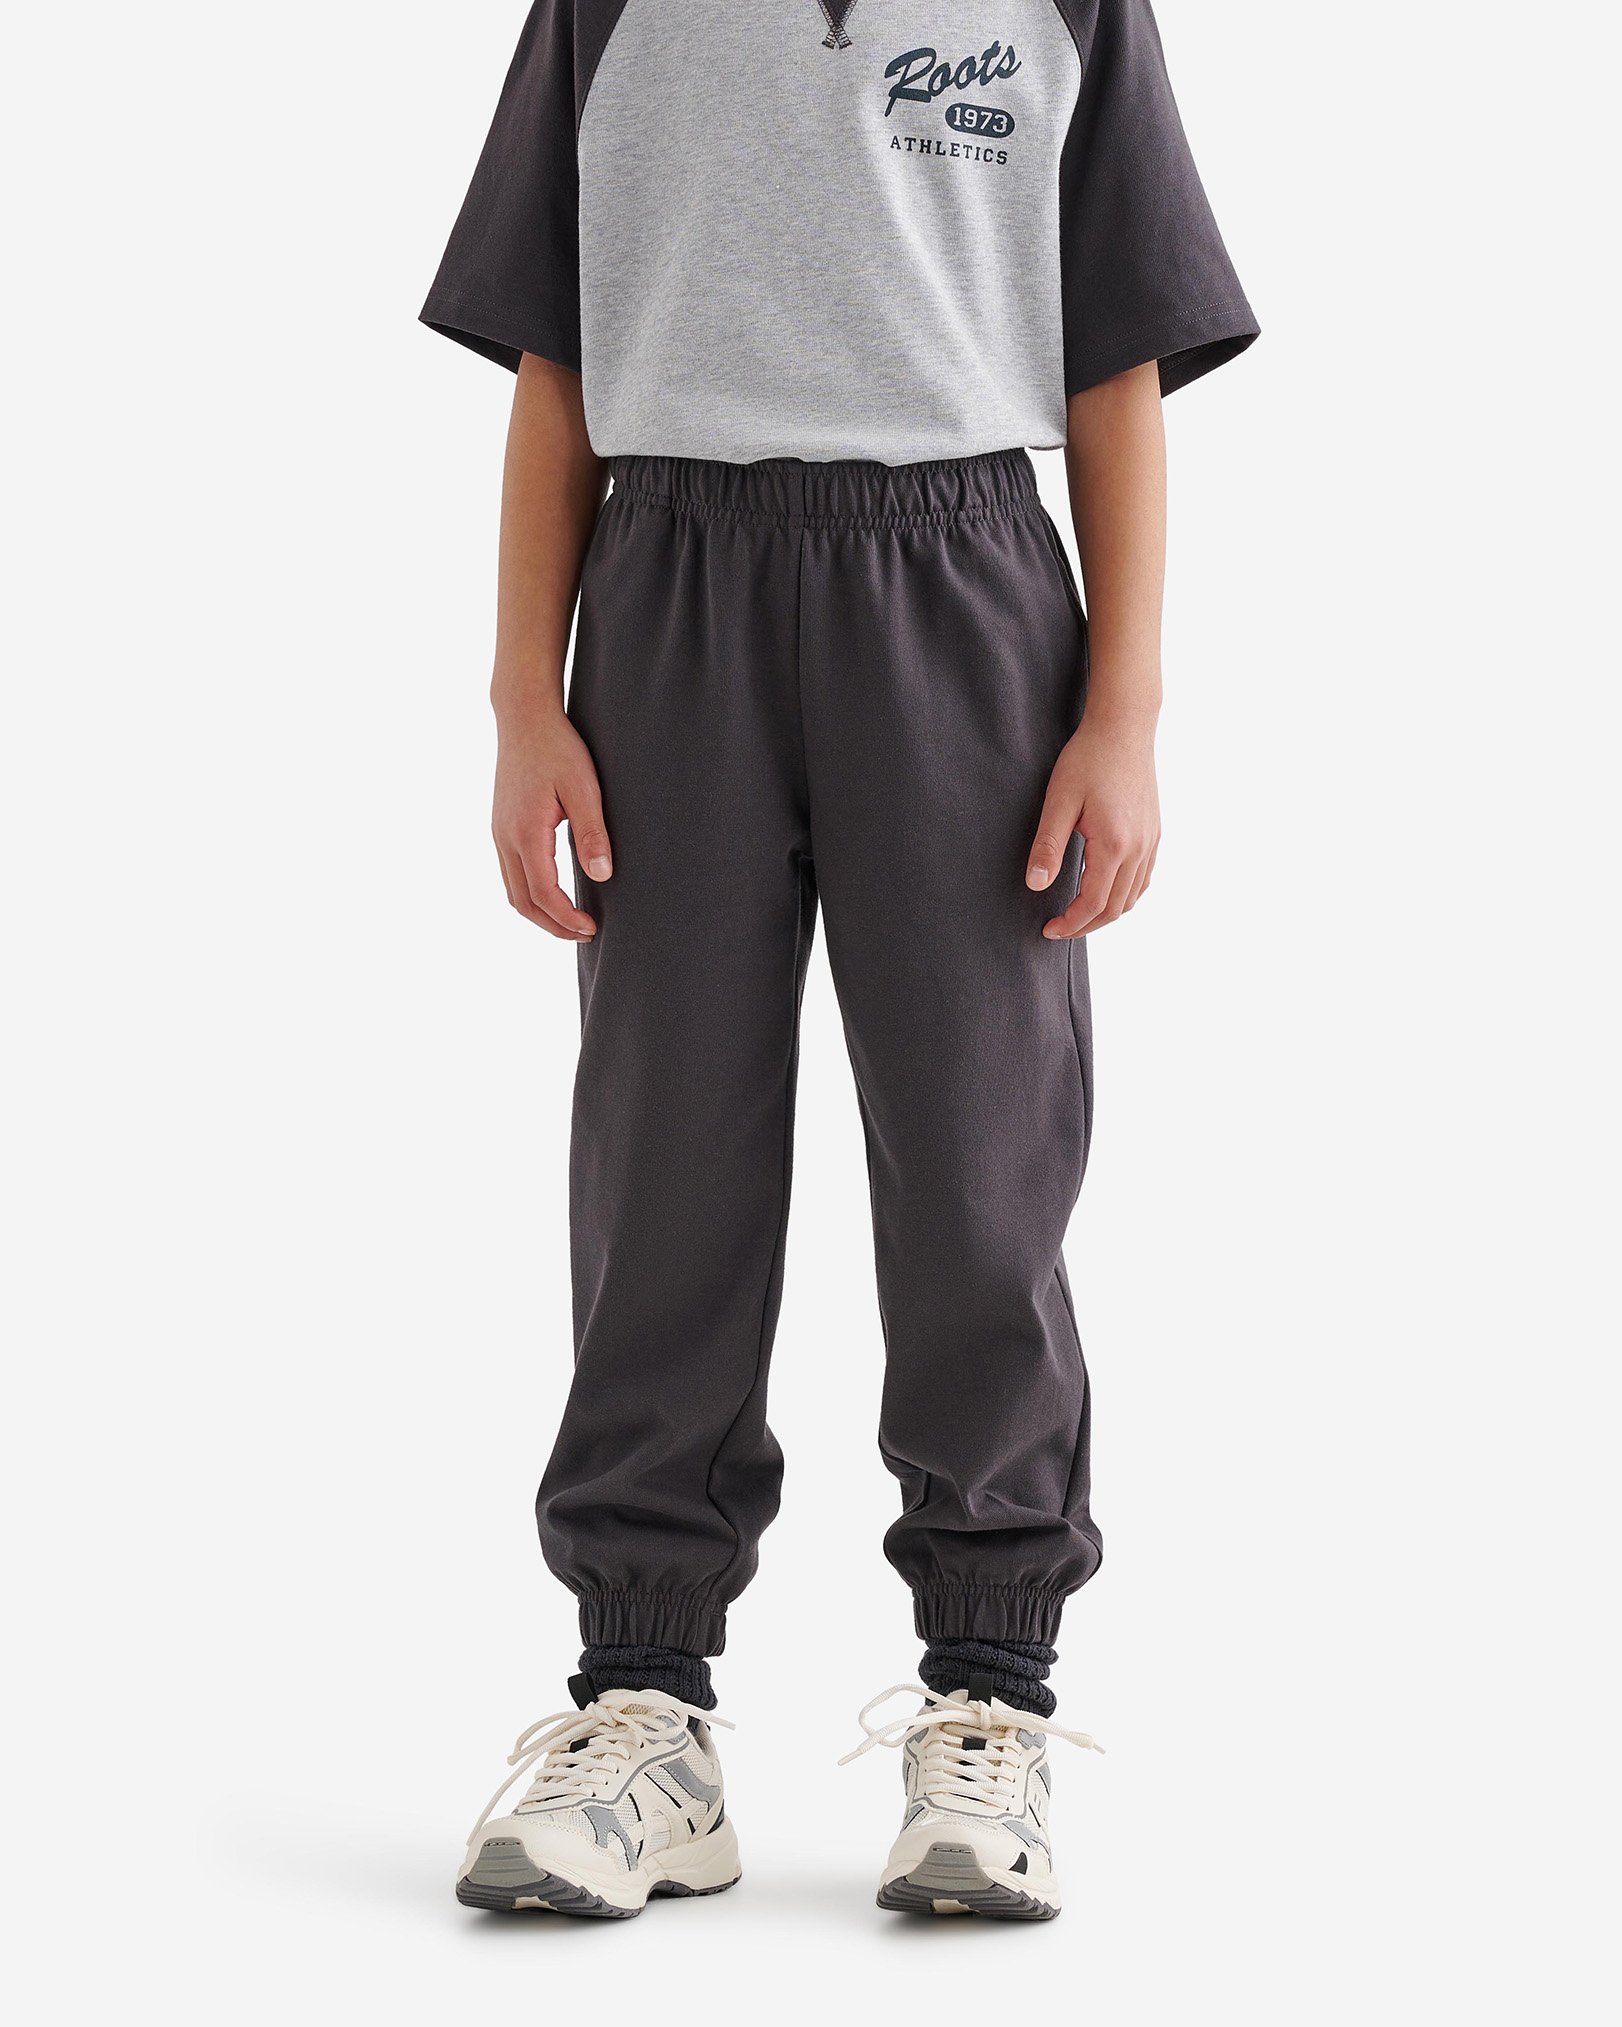 Roots Kids Warm-Up Pant in Charcoal Black